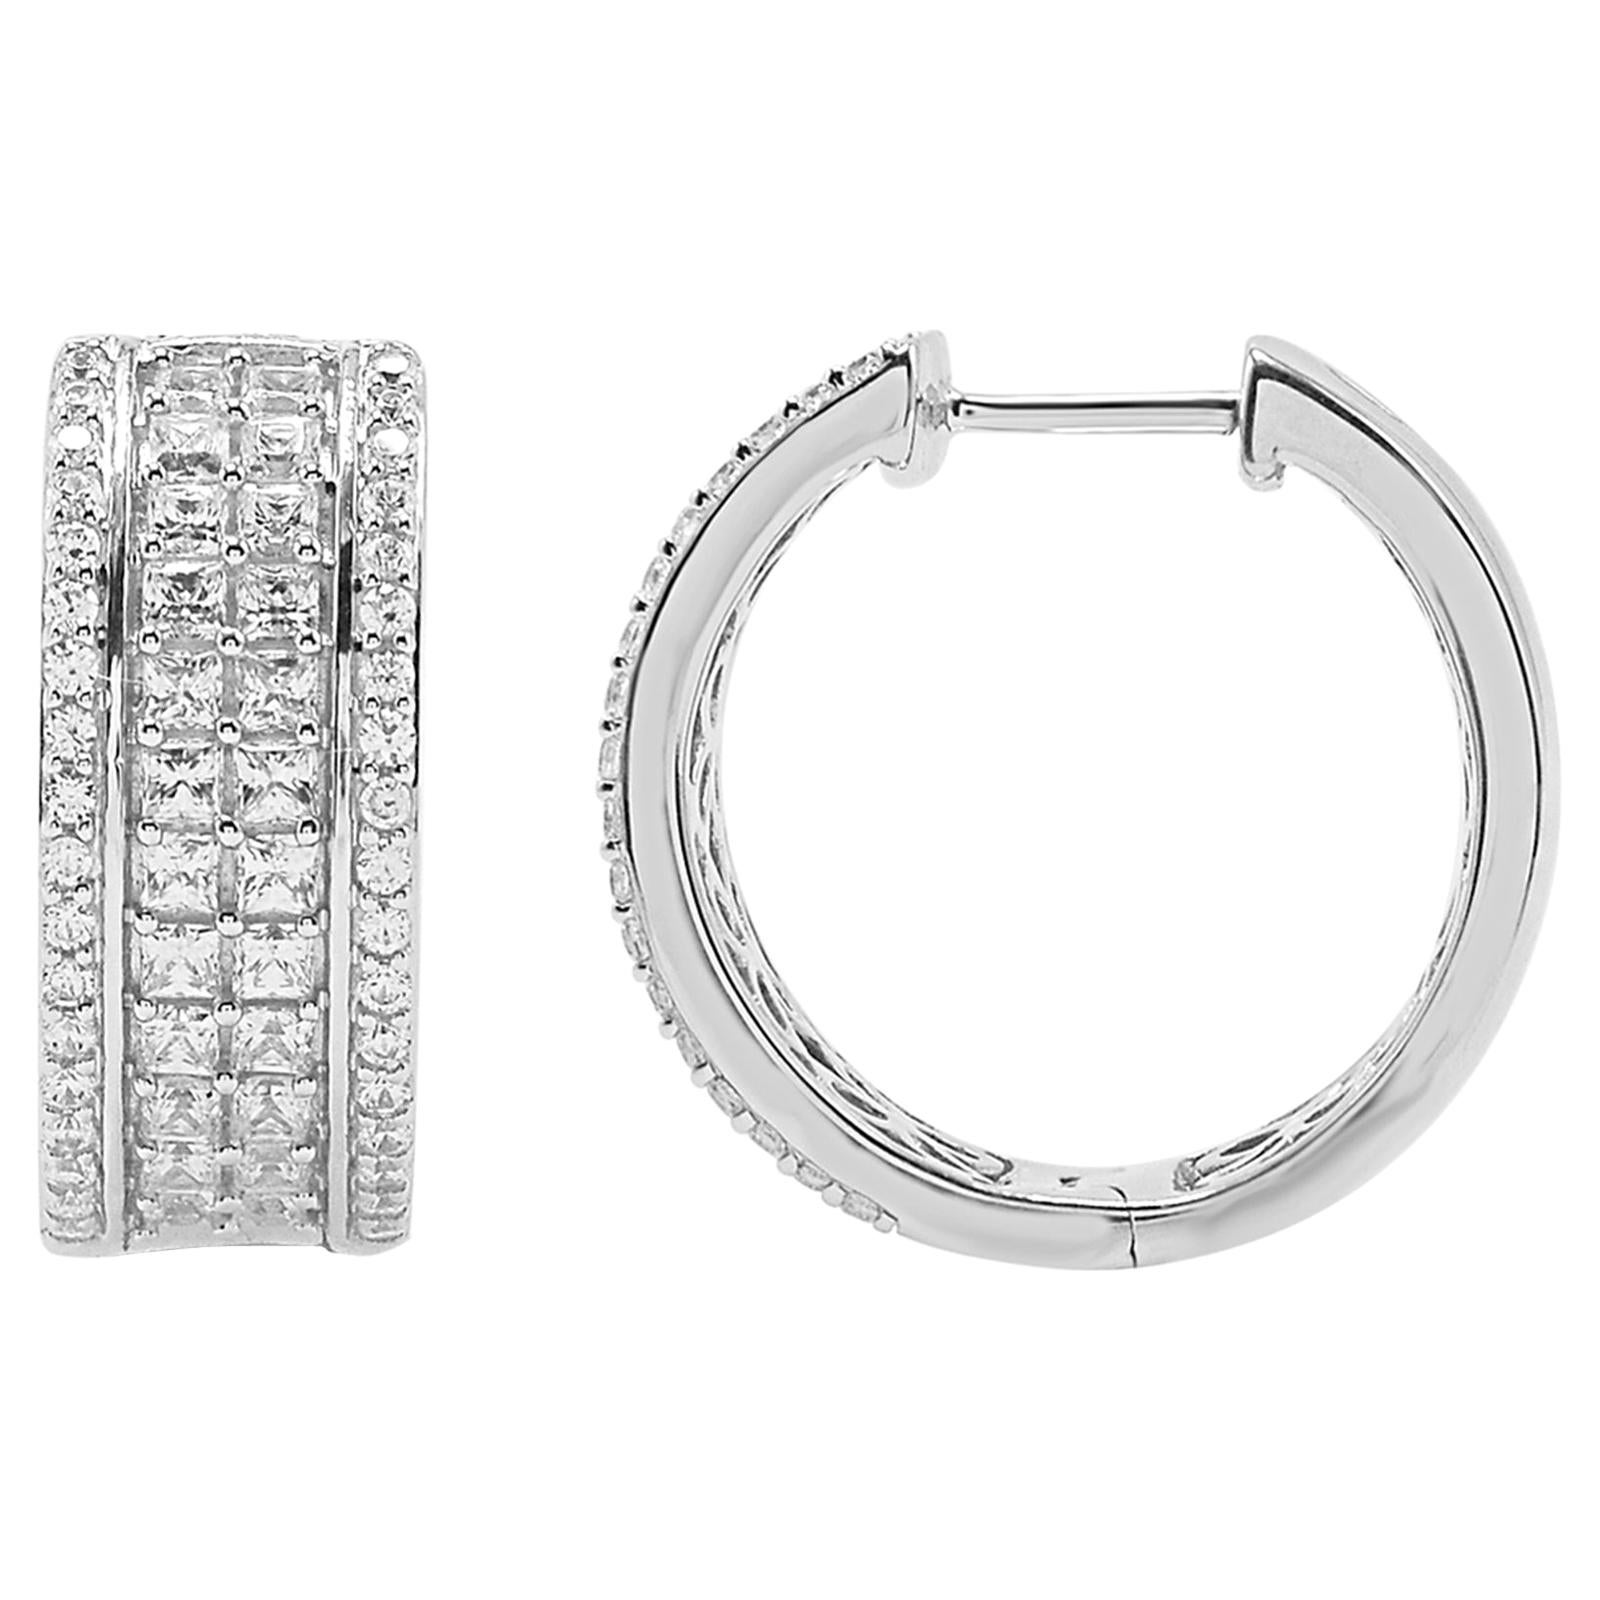 TJD 2Carat Round and Princess Cut Diamond 14K White Gold Multi-row Hoop Earrings For Sale